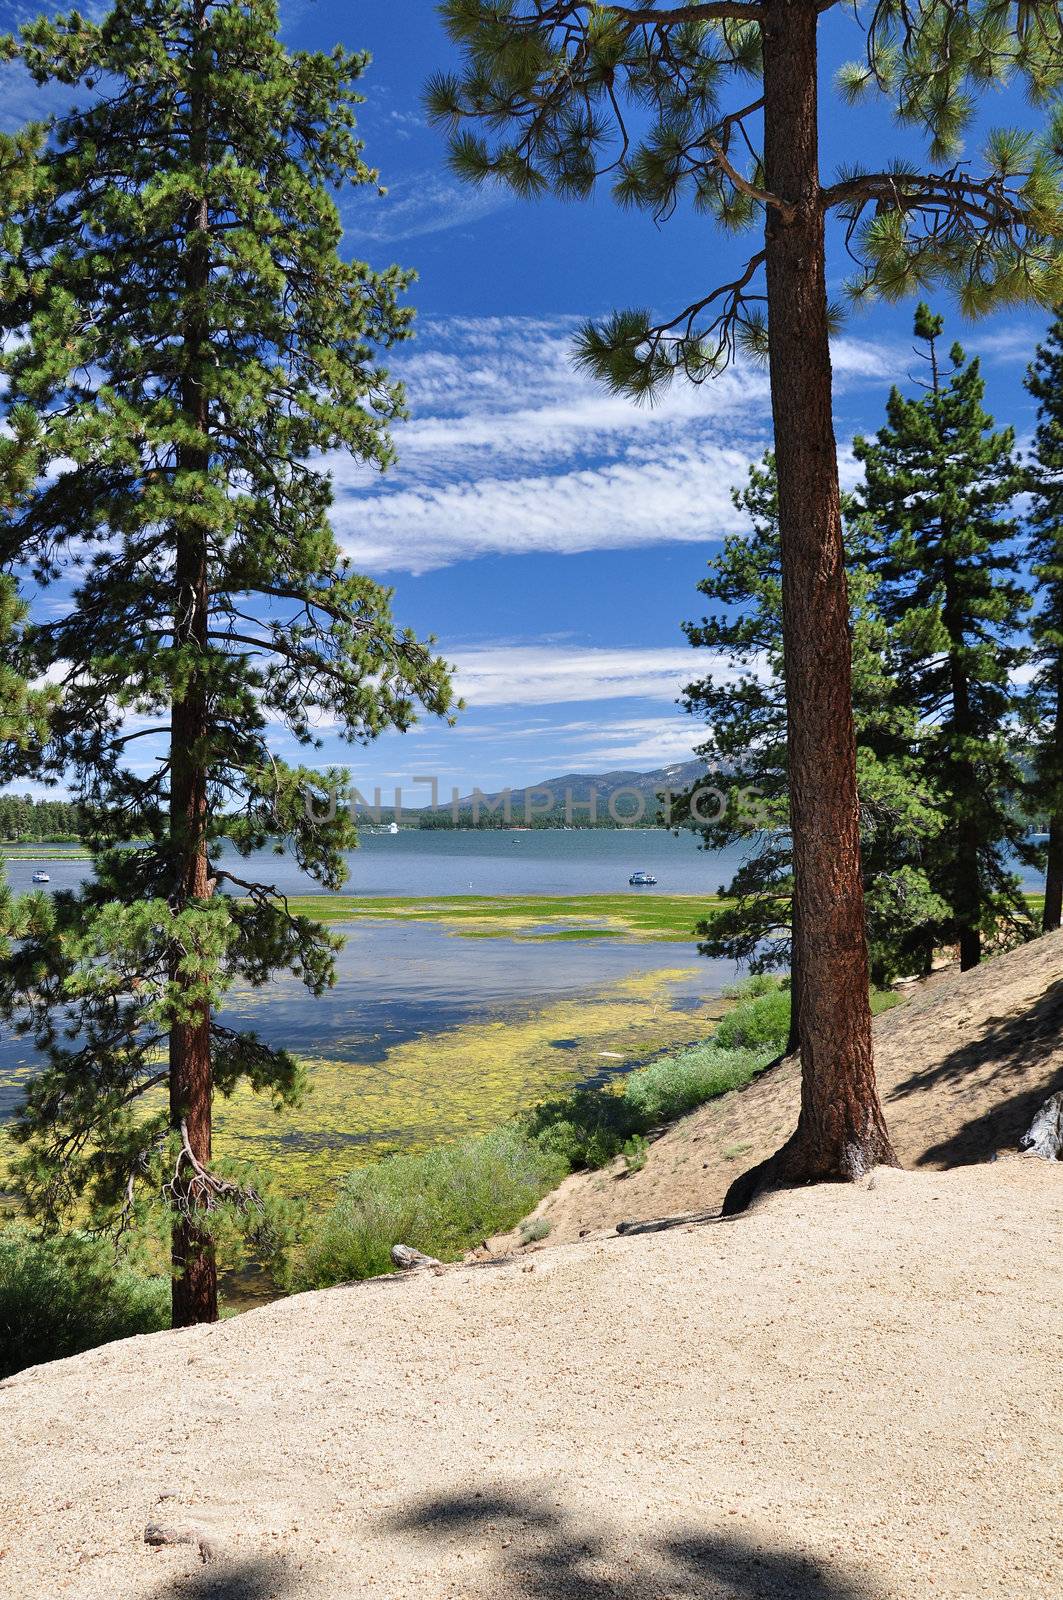 View of Big Bear Lake through pine trees in the Southern California mountains.